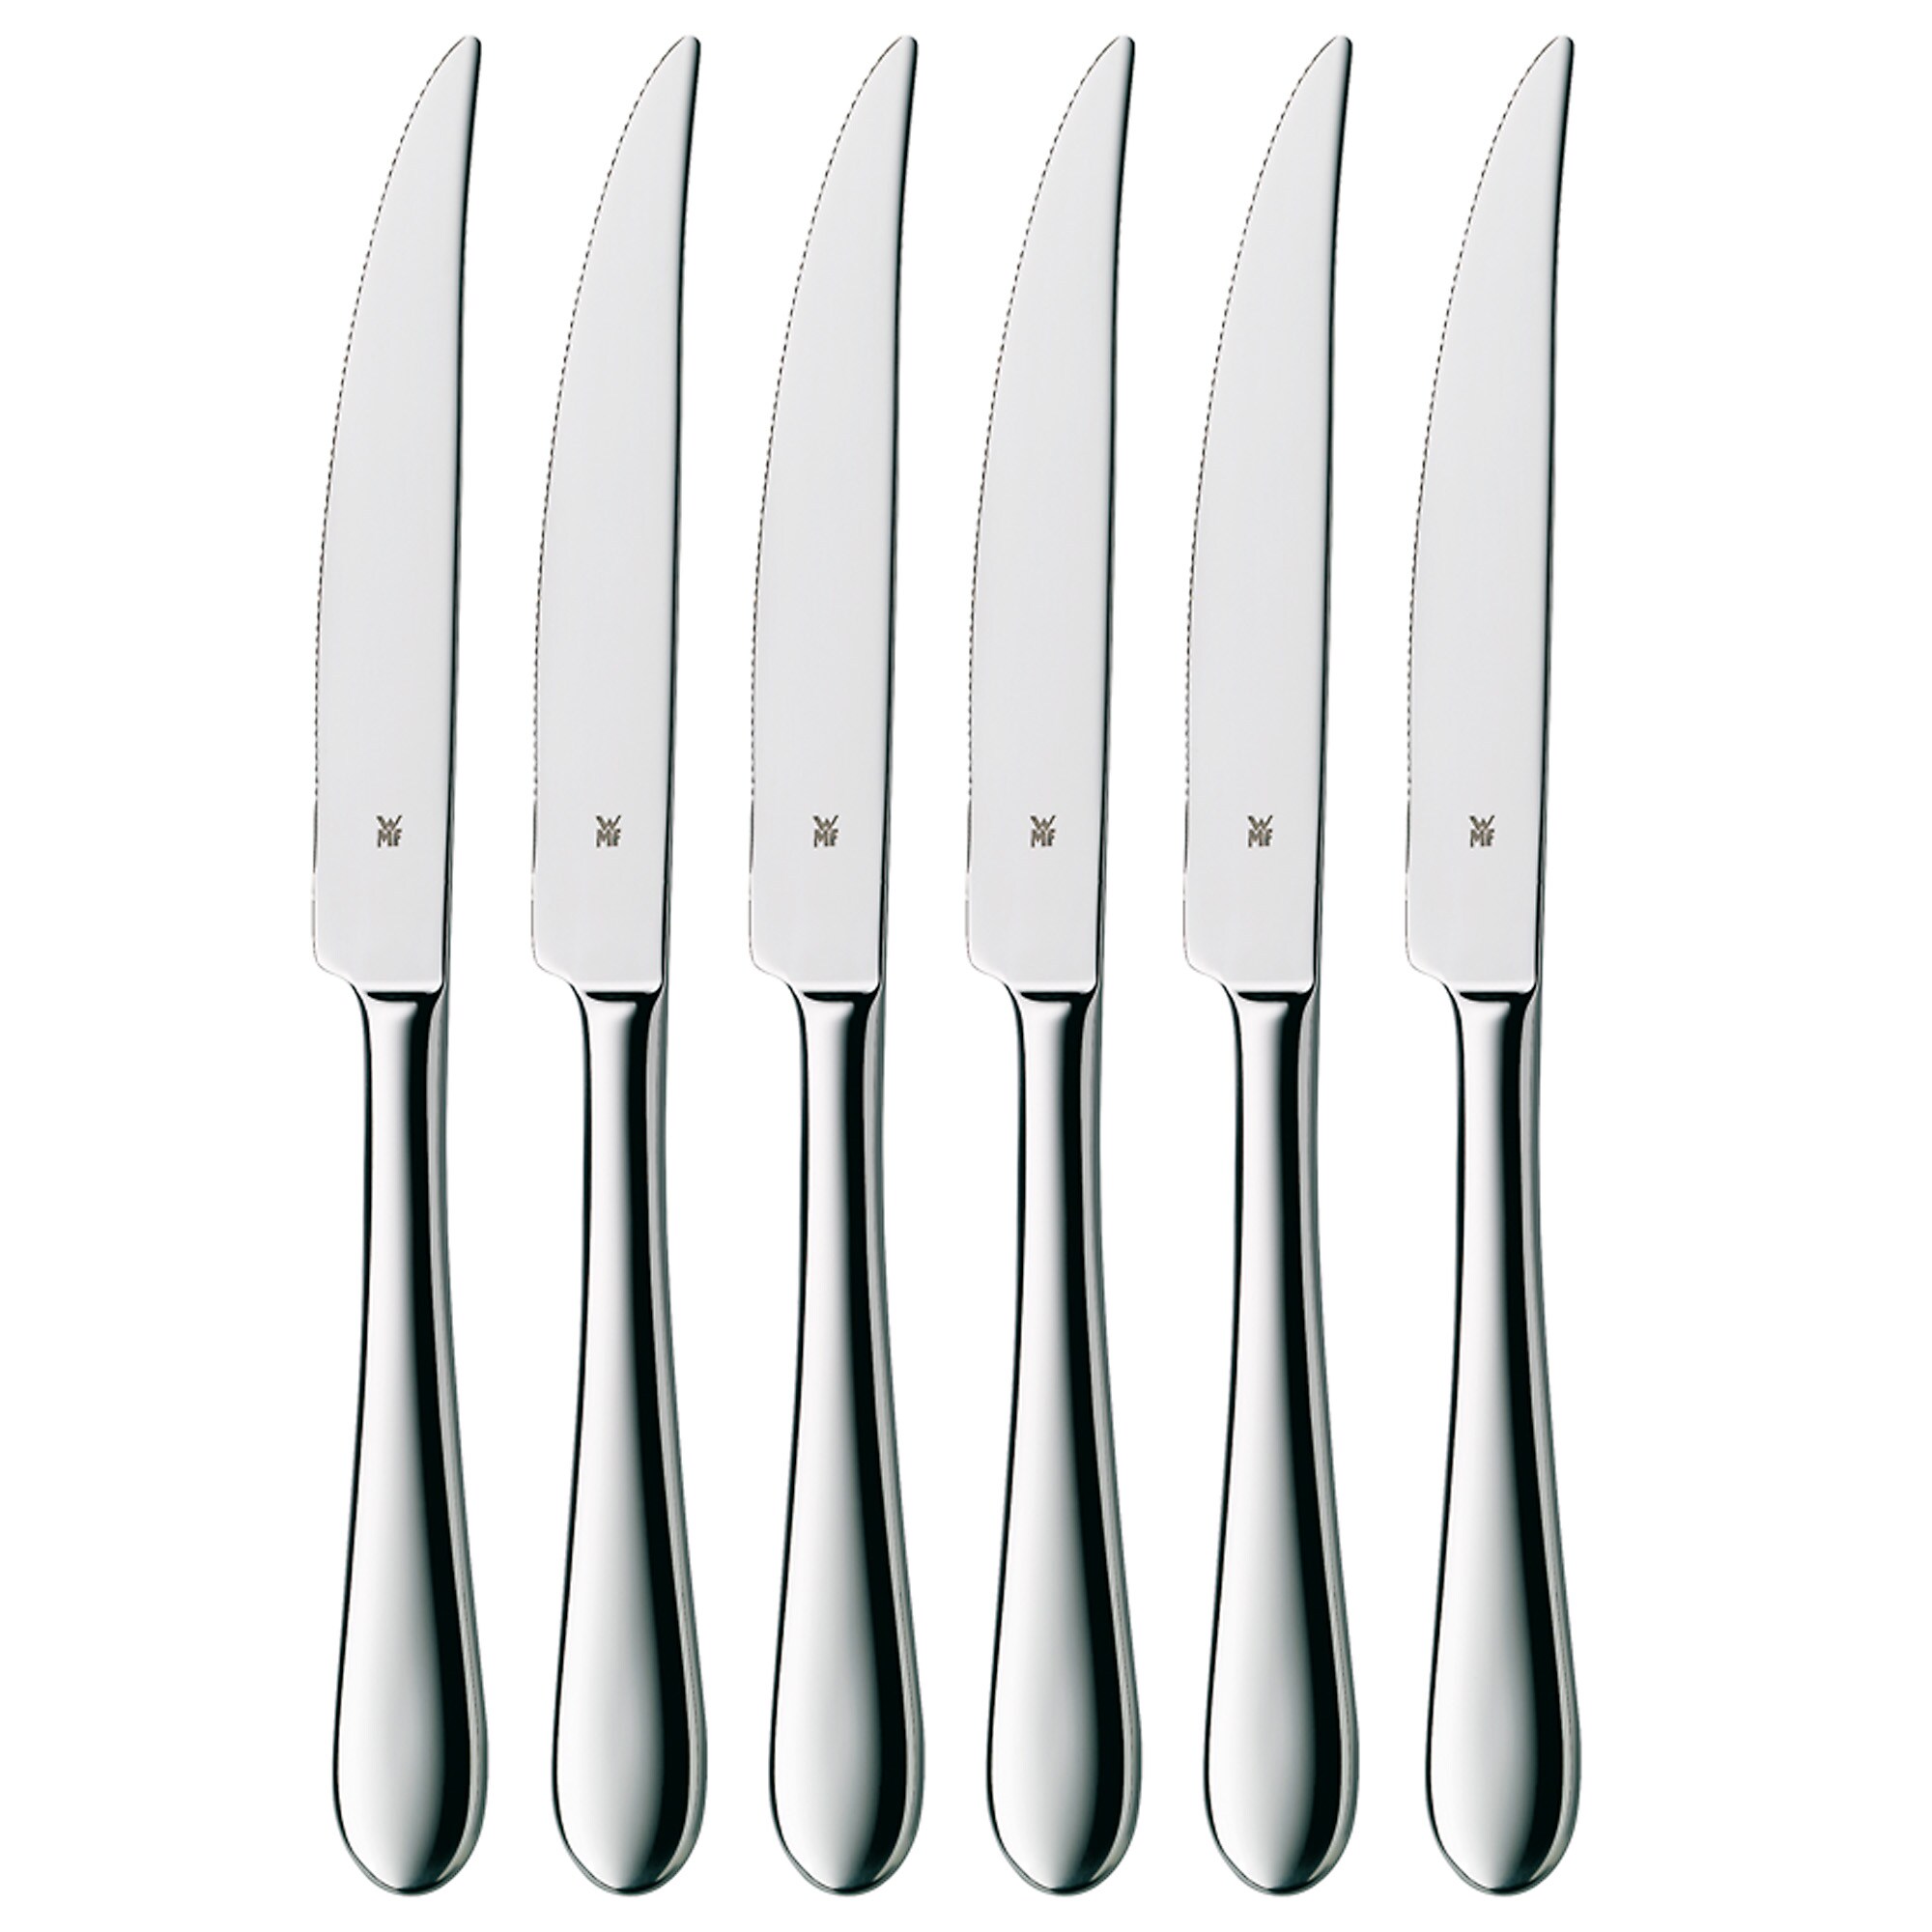 WMF Signum Stainless Steel Steak Knives (Set of 6)